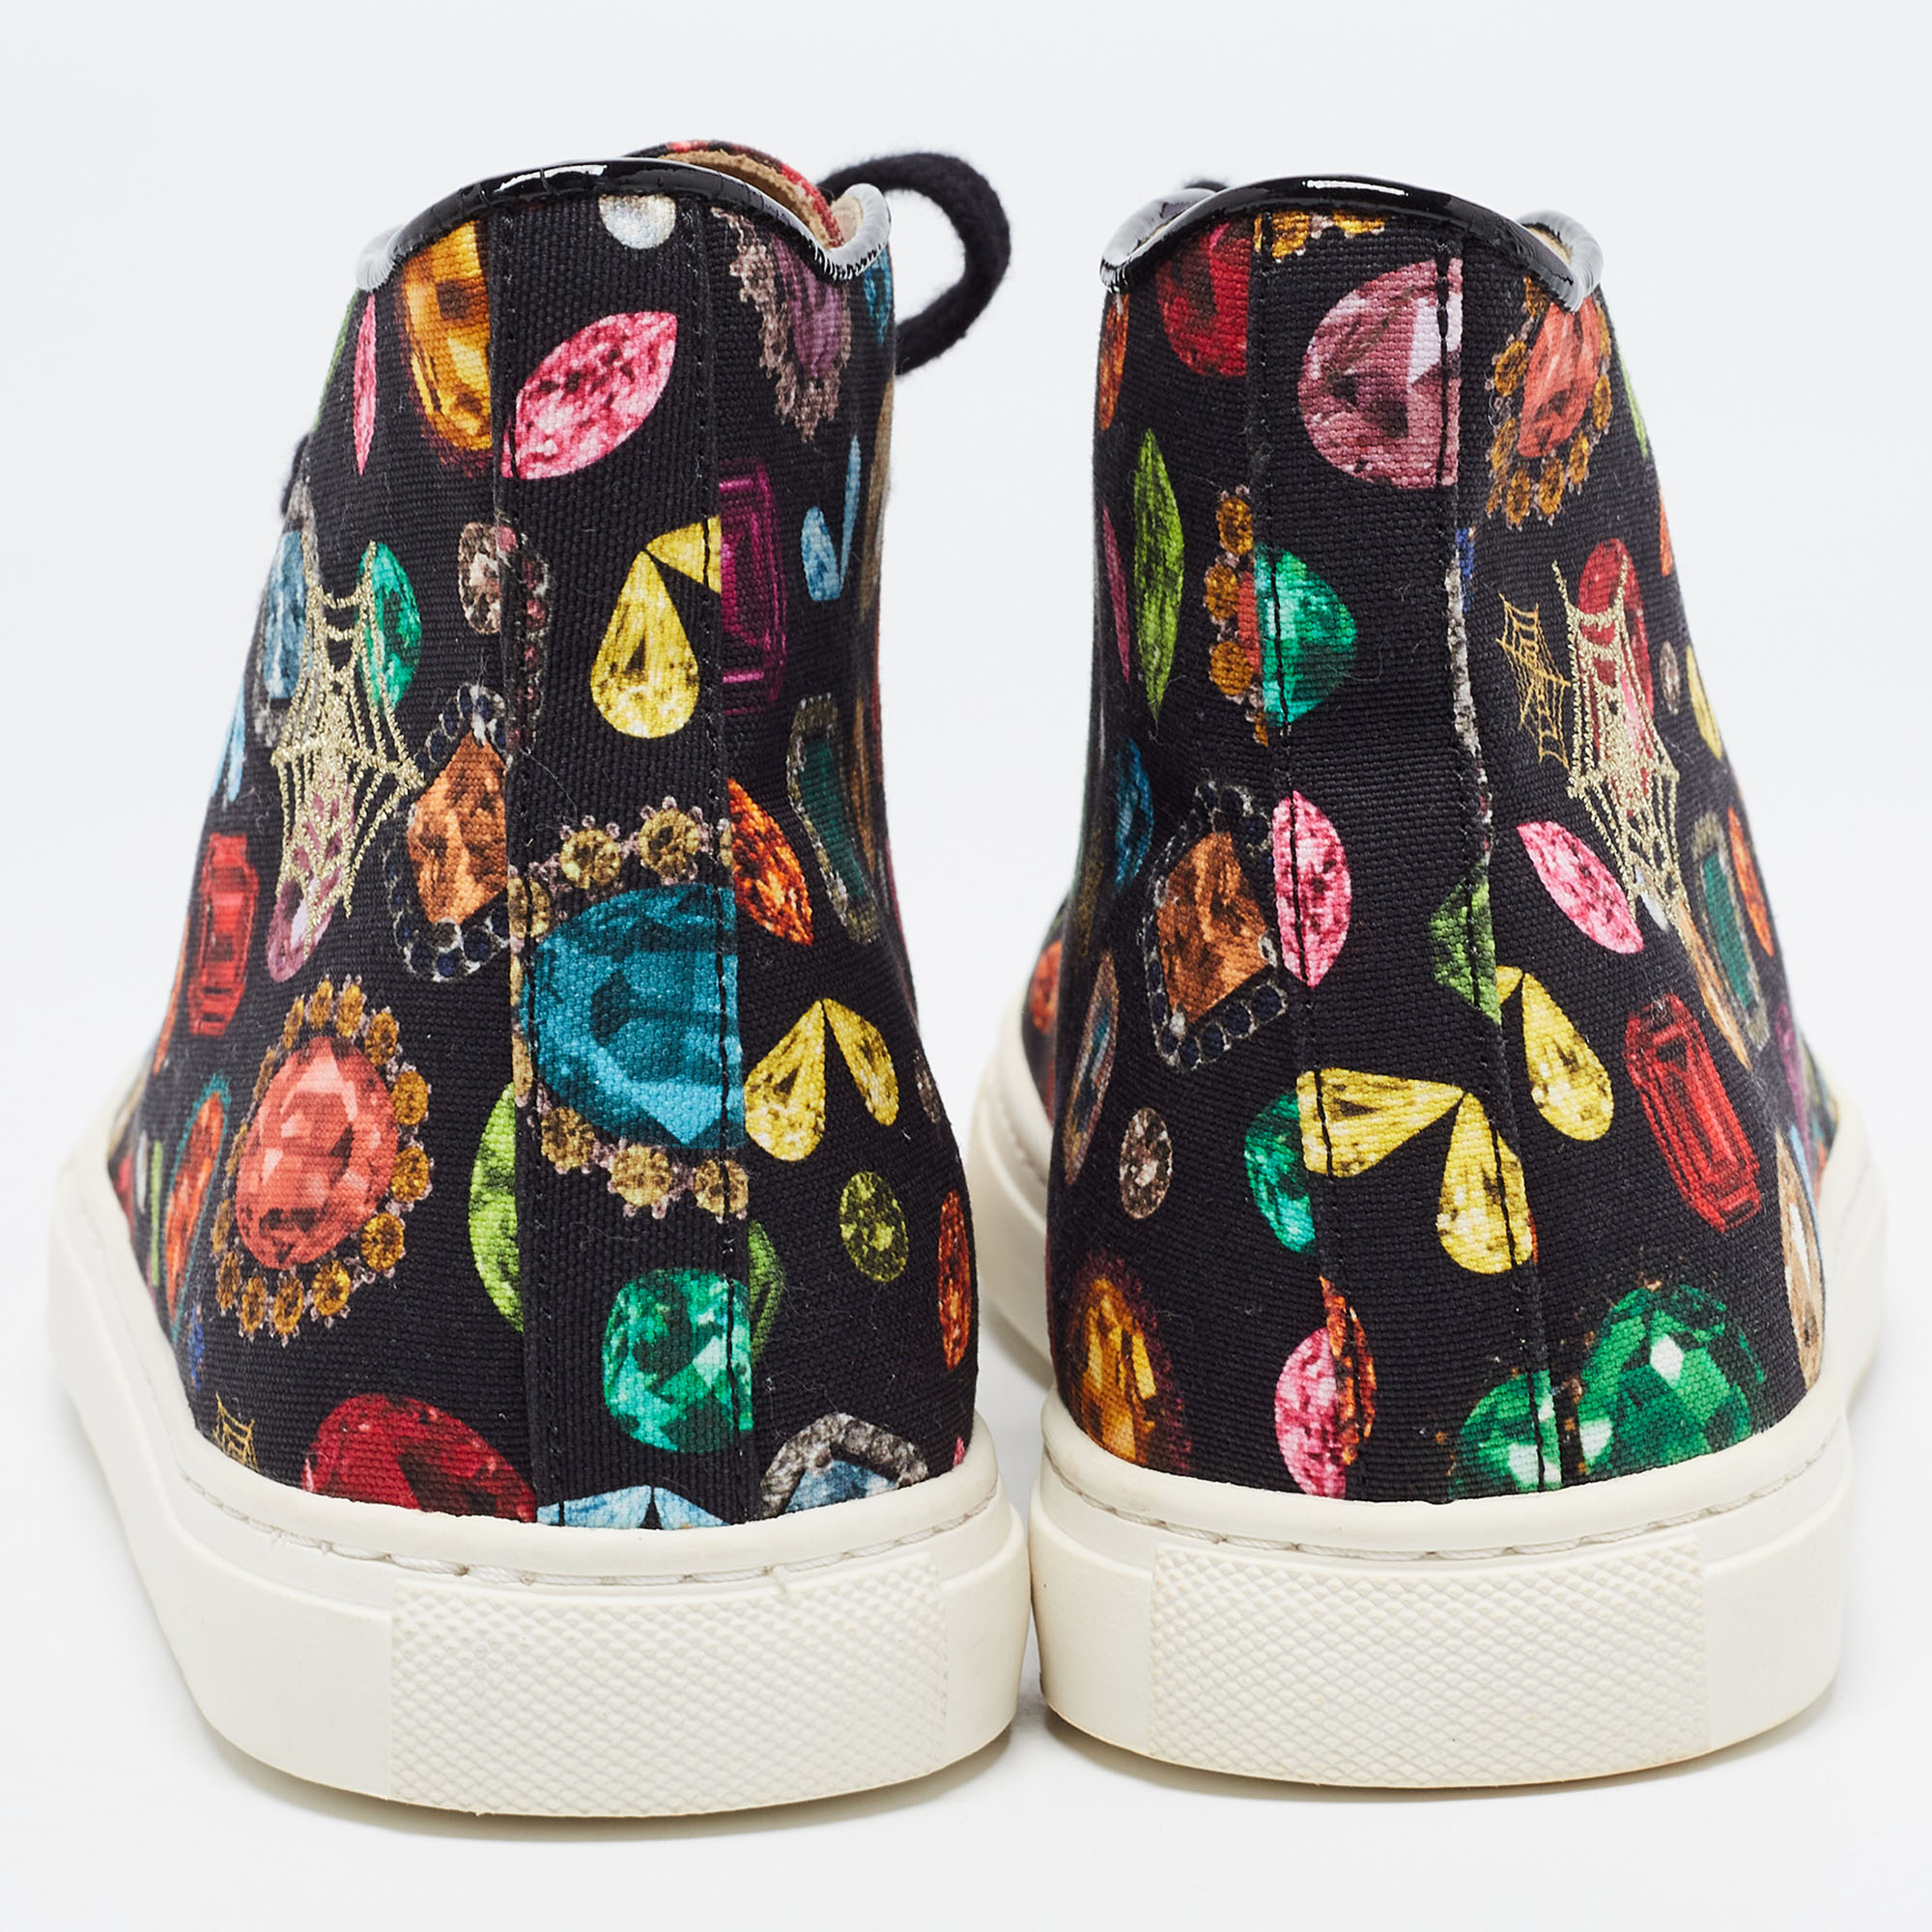 Charlotte Olympia Multicolor Jewel Print Canvas High Top Sneakers Size 36.5